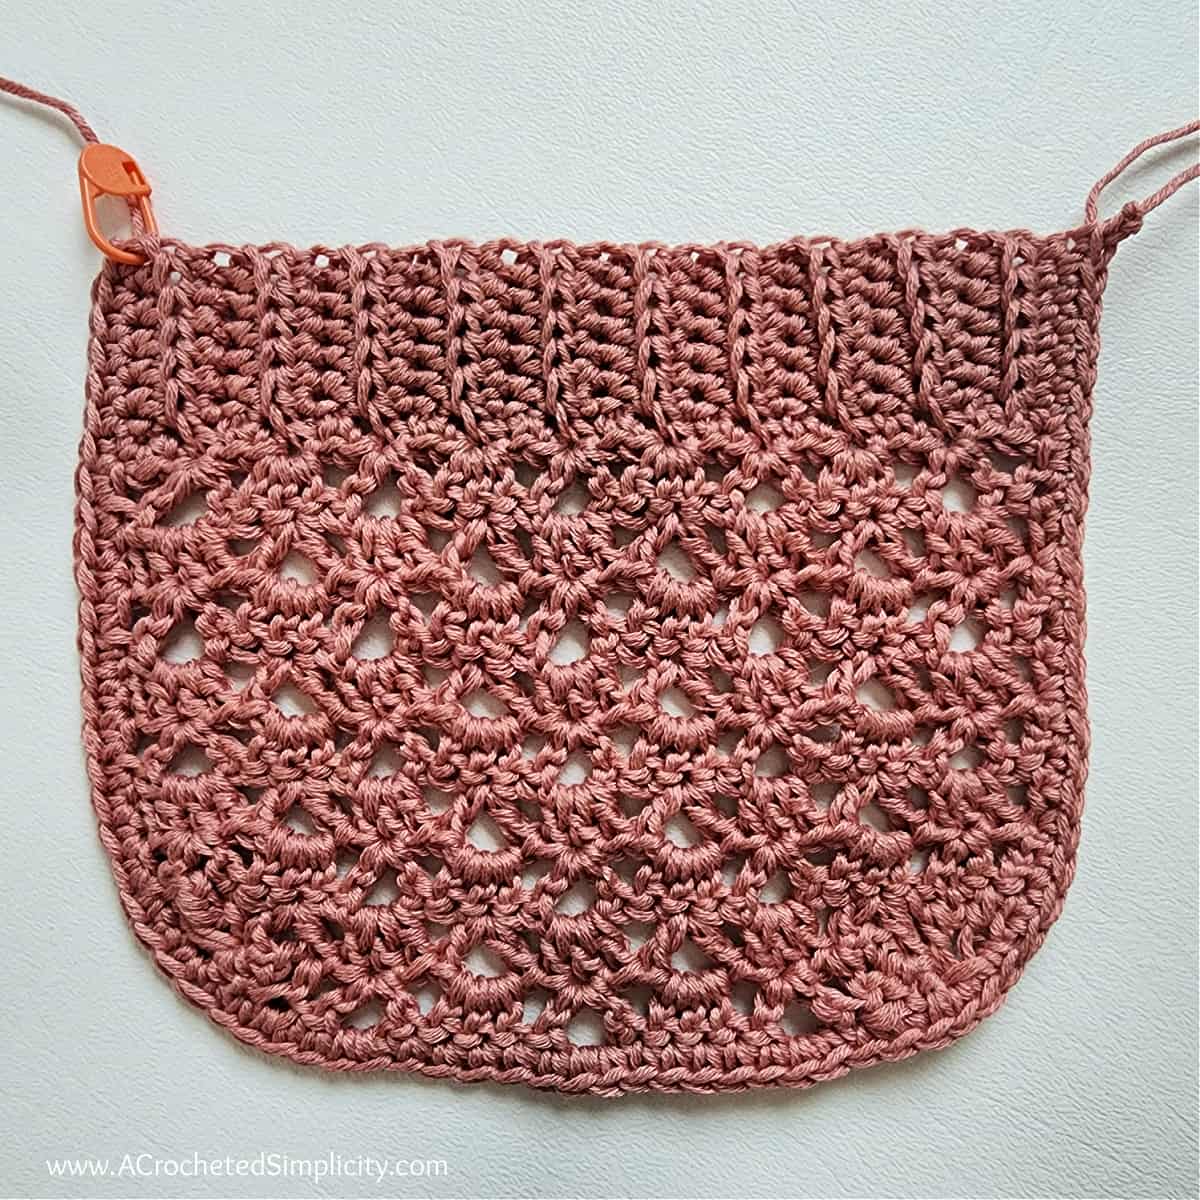 One mauve lacey crochet pocket laying on a white surface.